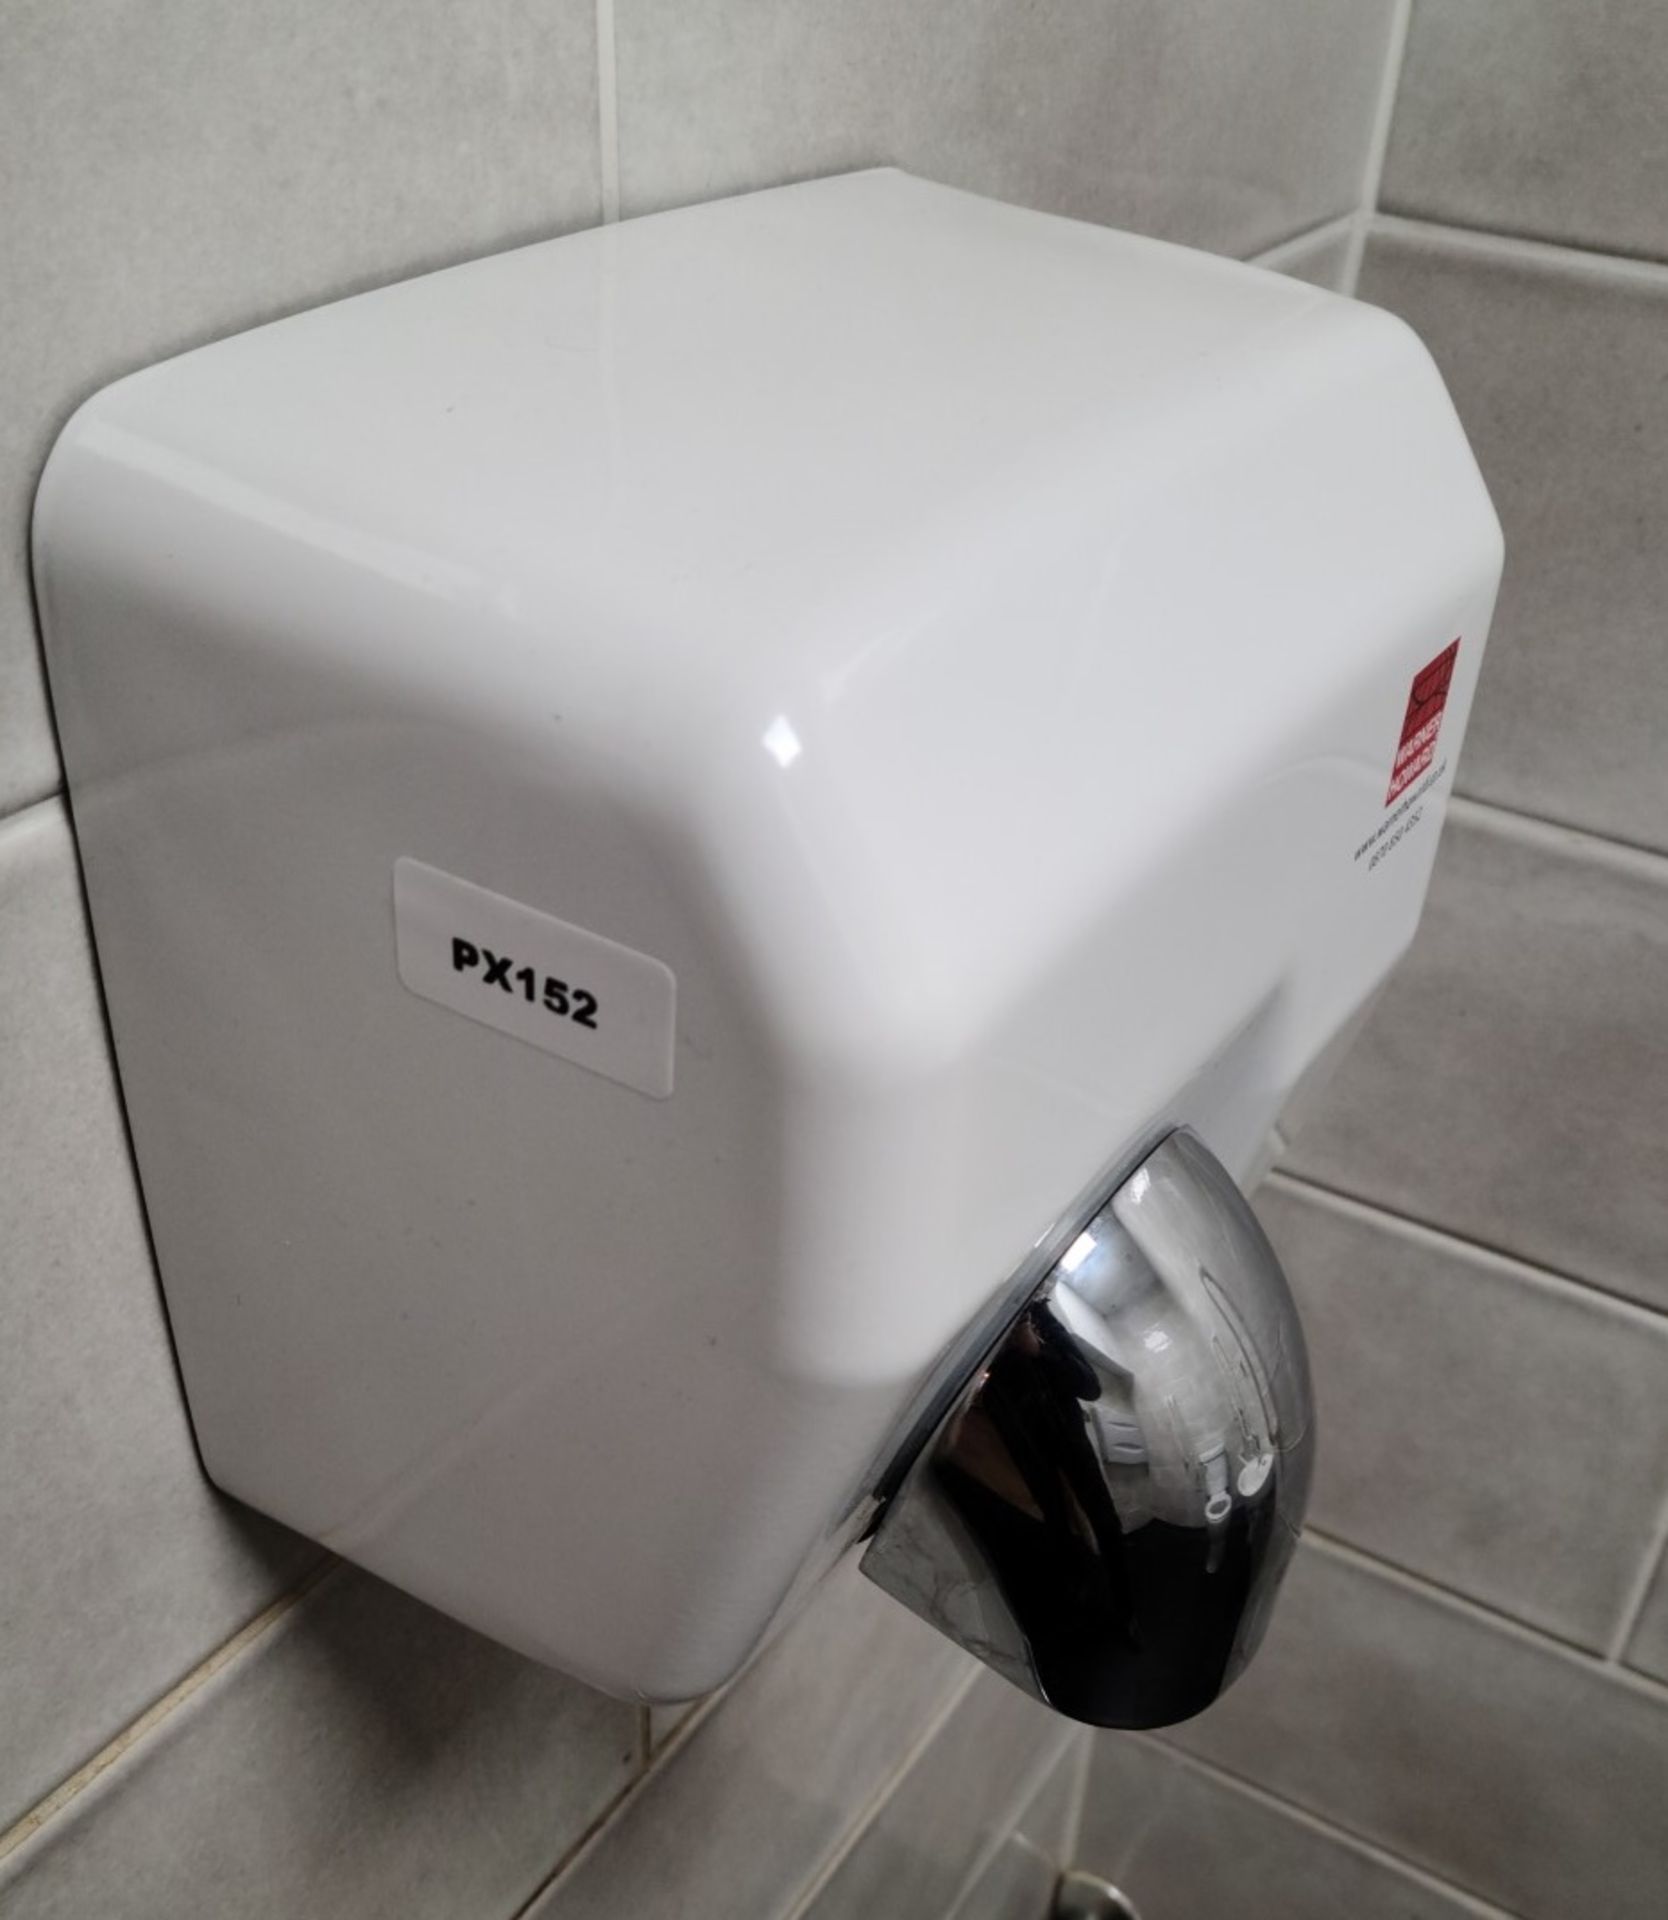 1 x WARNER HOWARD High Performance Hand Dryer 360 Degree Swivel Nozzle For Public Areas - Image 3 of 4